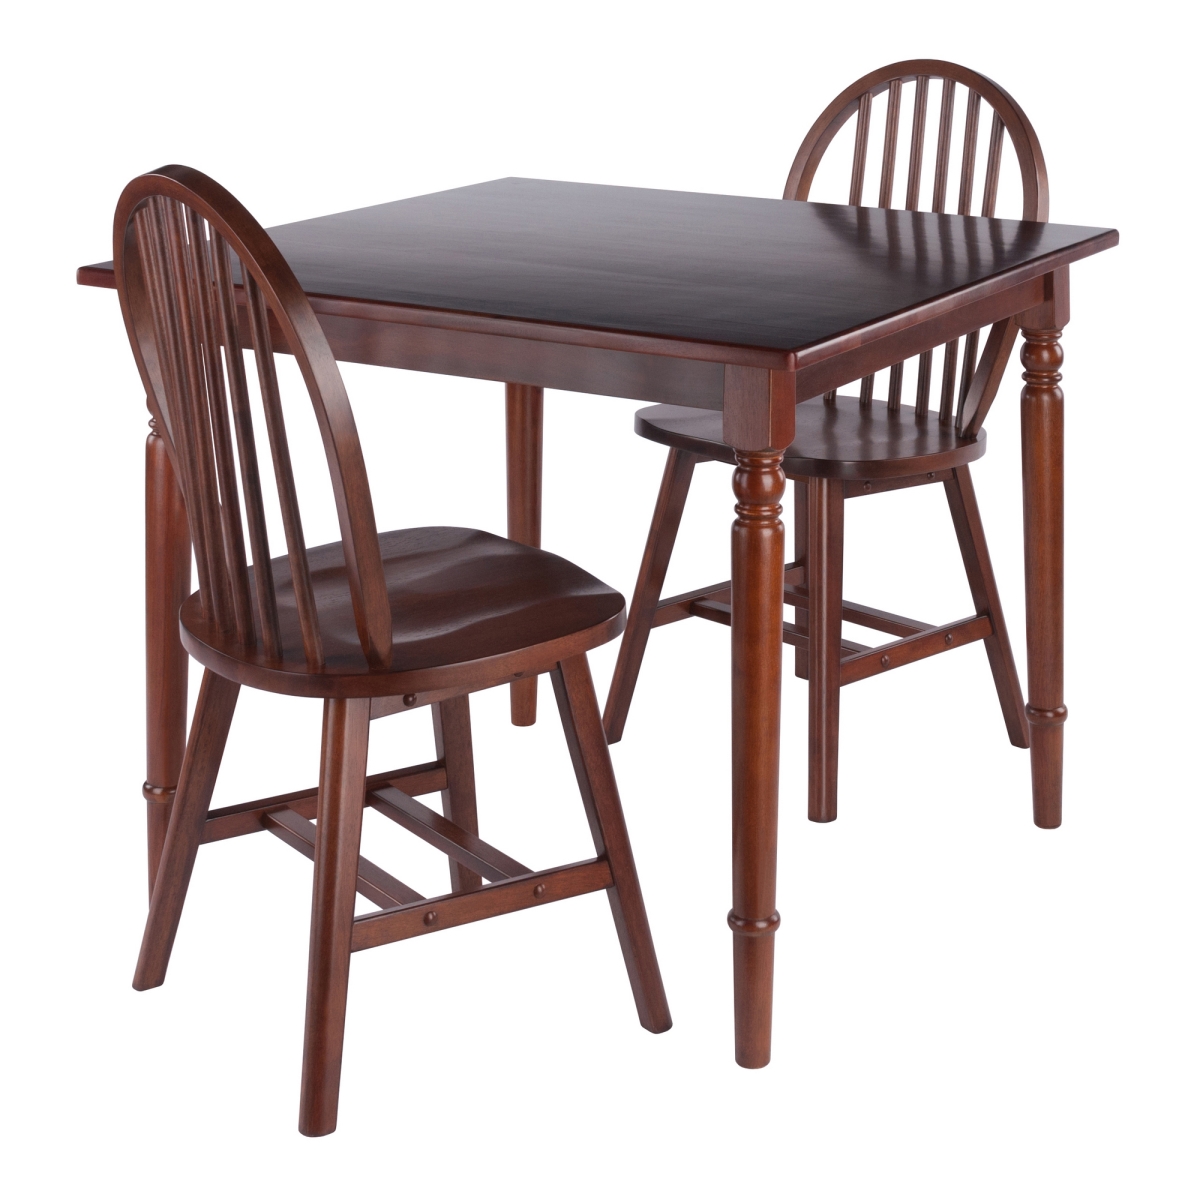 Picture of Winsome Wood  94867 Mornay 3-Pc Dining Table with Windsor Chairs, Walnut